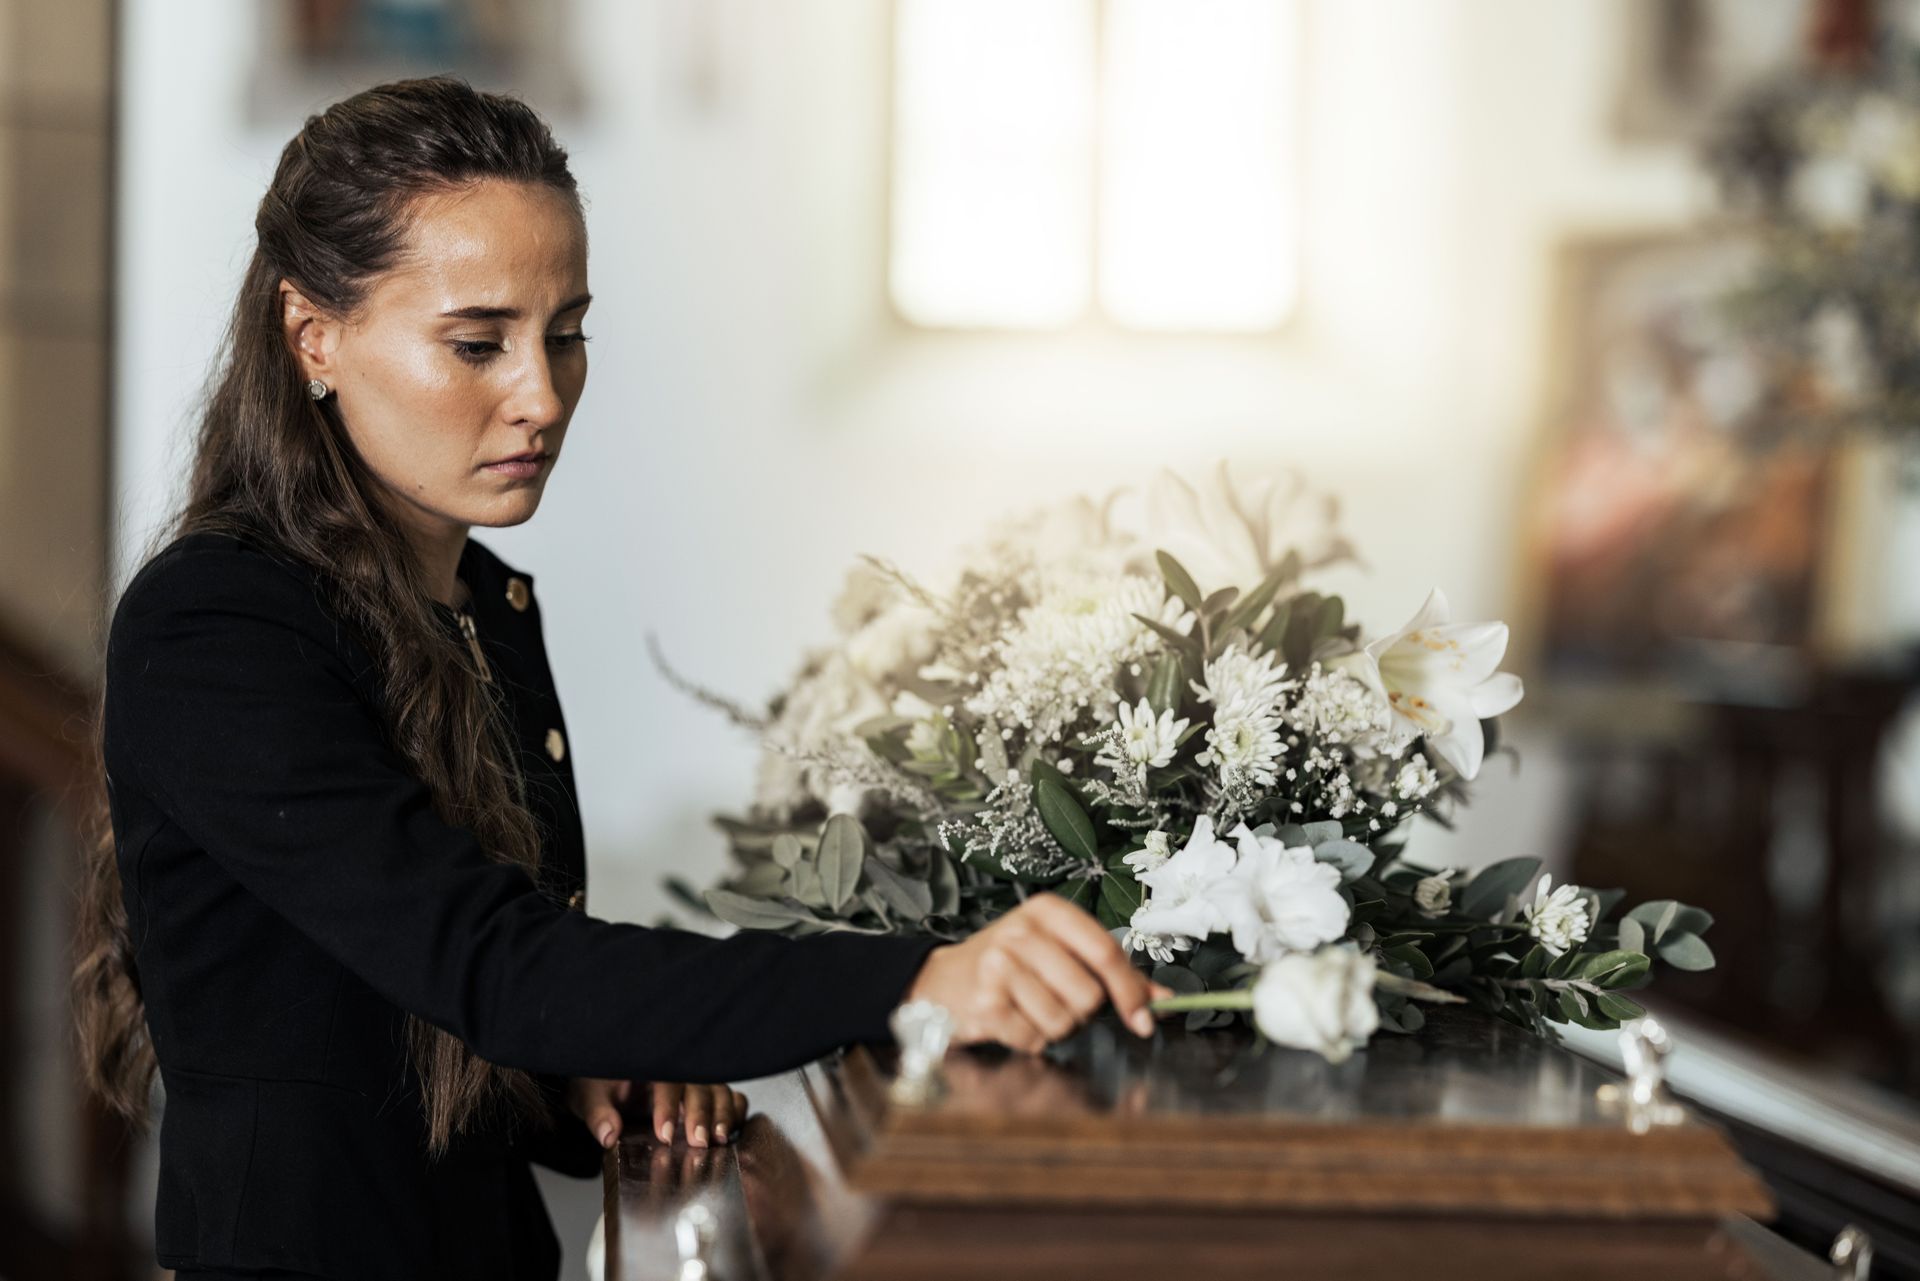 Funeral Director - Professional Fees is Claimable